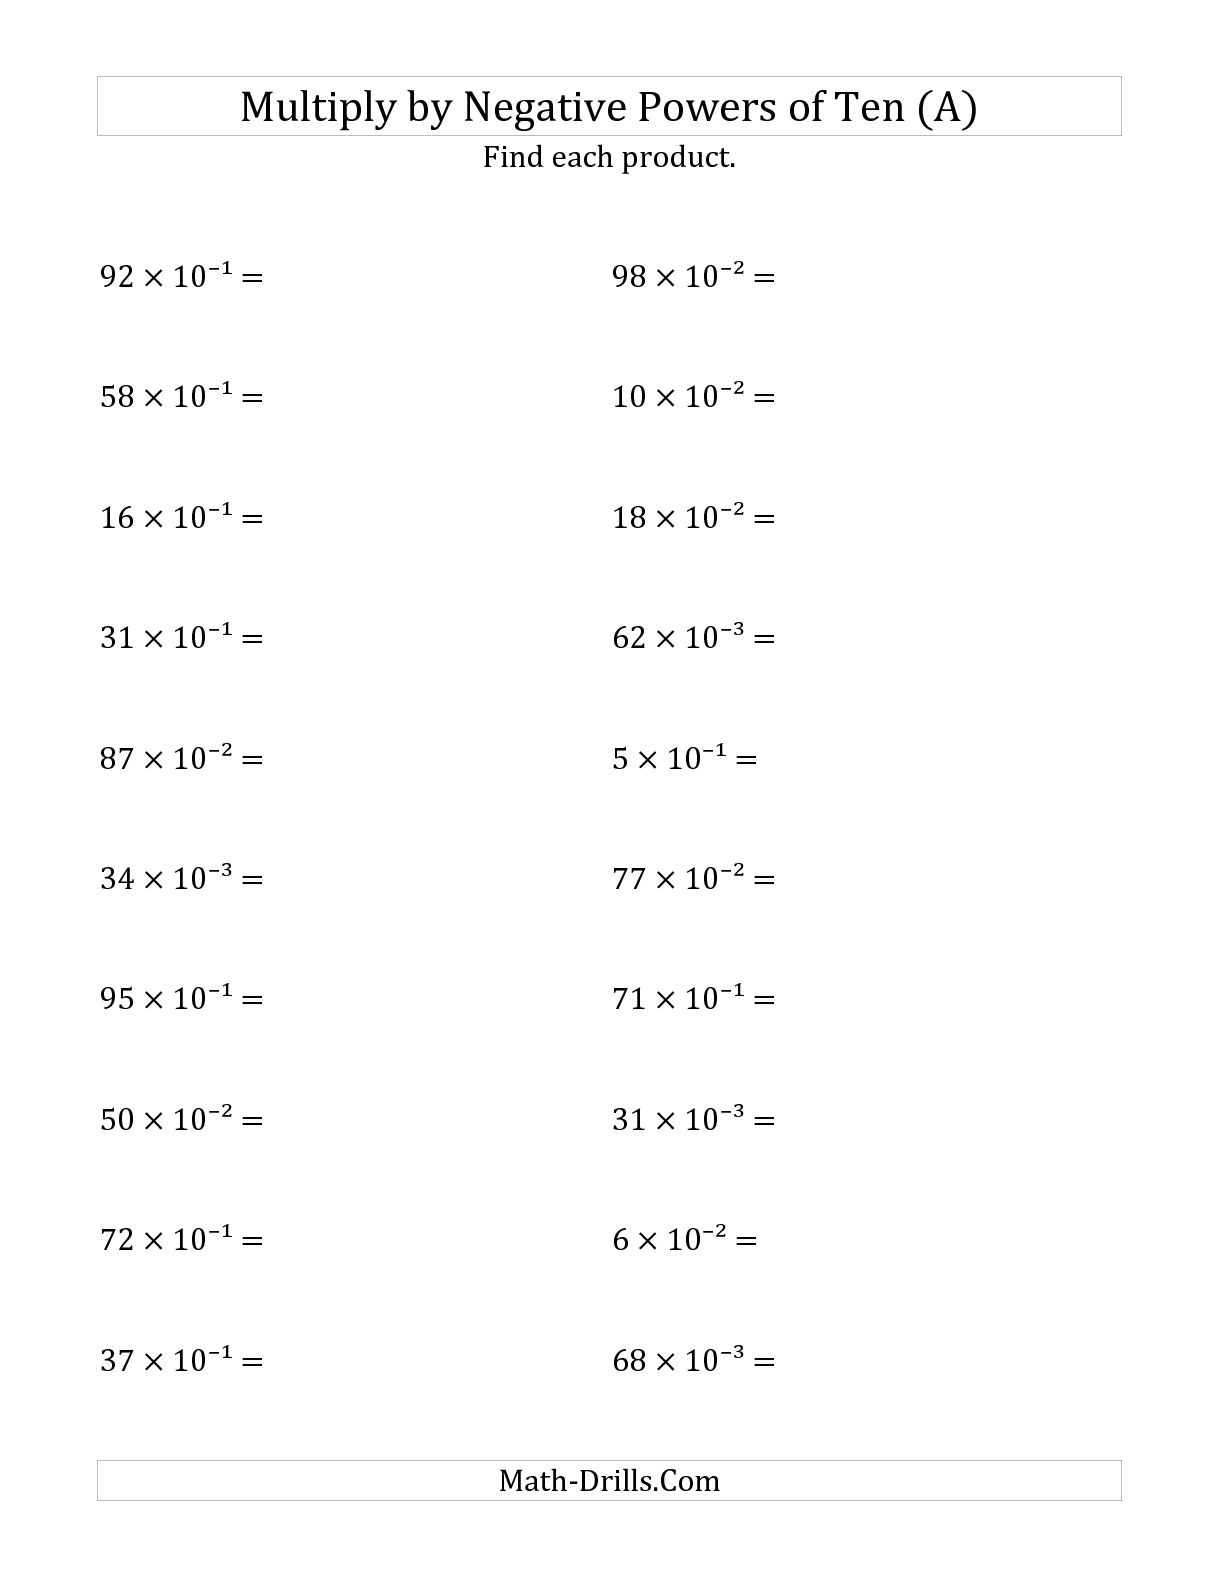 Negative Numbers And Exponents Worksheet